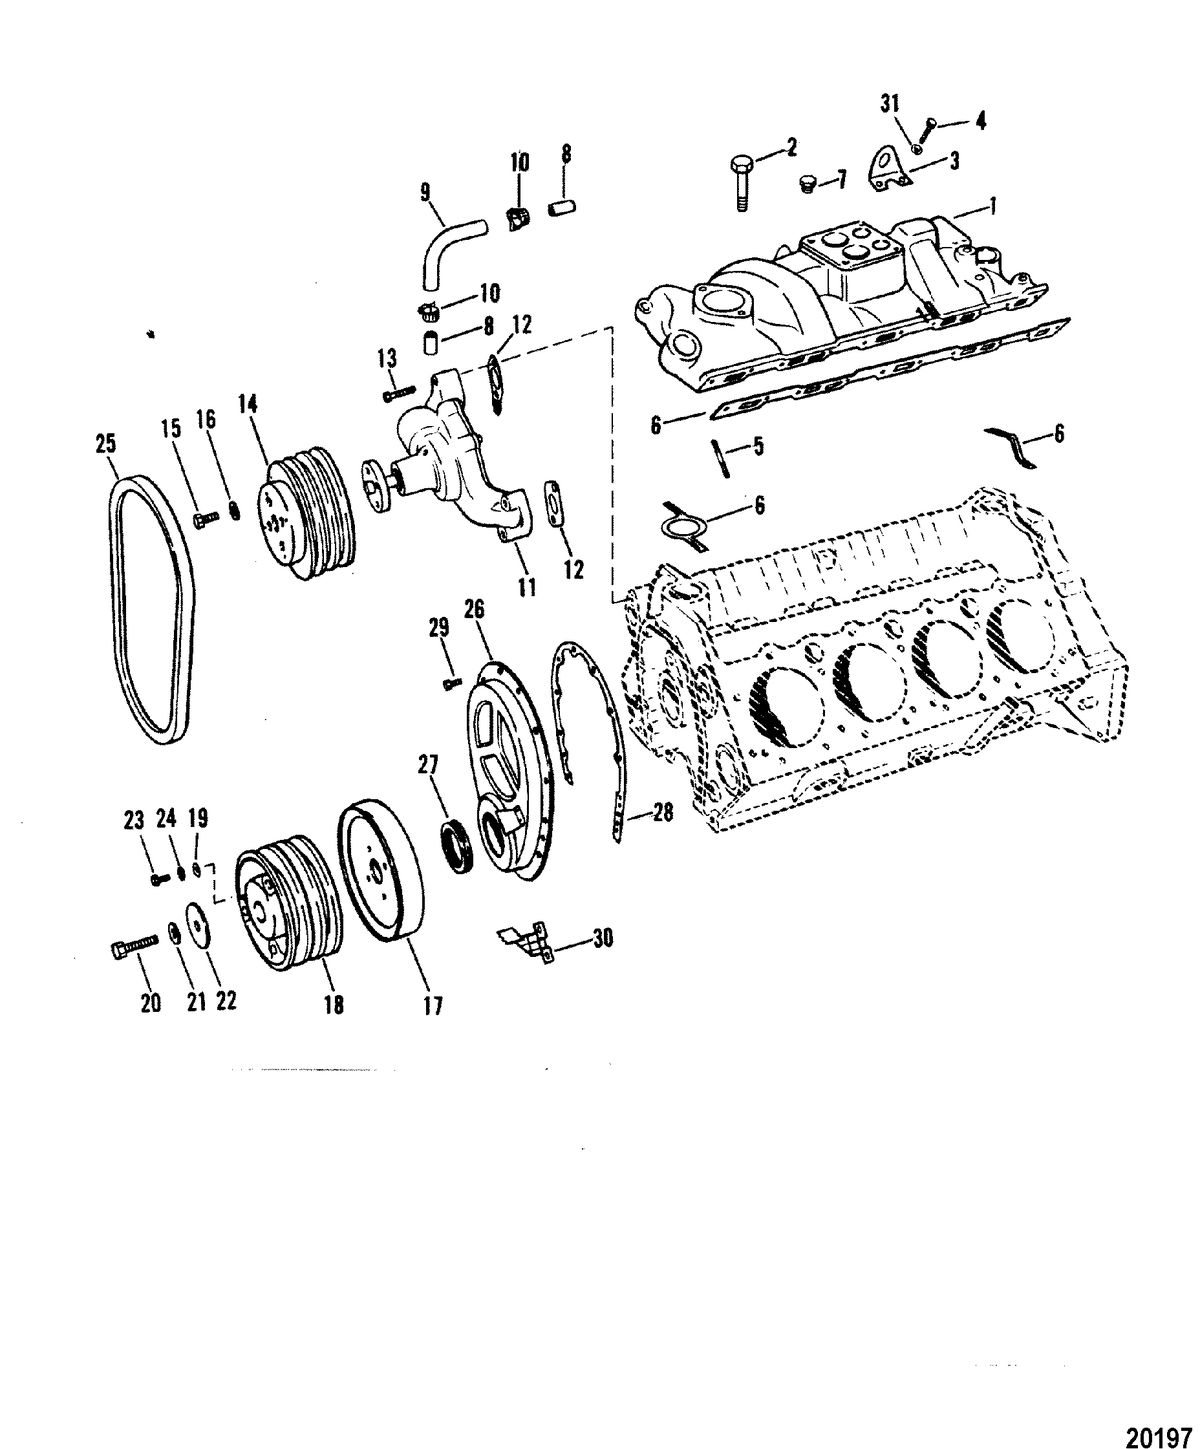 MERCRUISER 330 H.P. ENGINE W/BORG WARNER Intake Manifold and Front Cover(Cast Crankshaft Pulley)